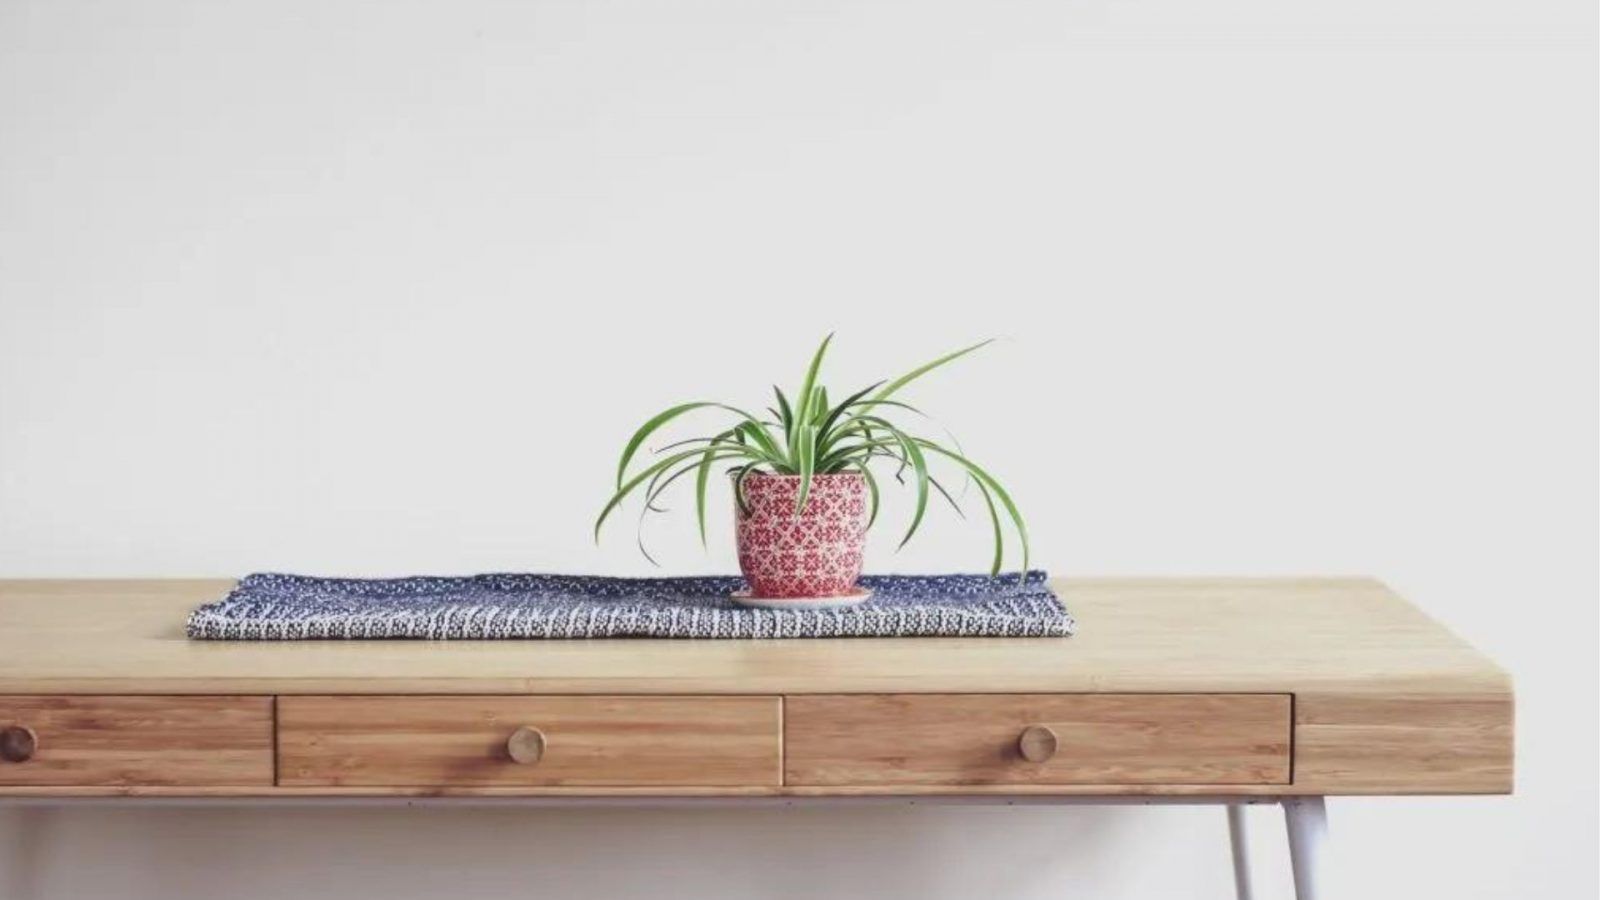 Spider plant care tips: How to grow a spider plant indoors